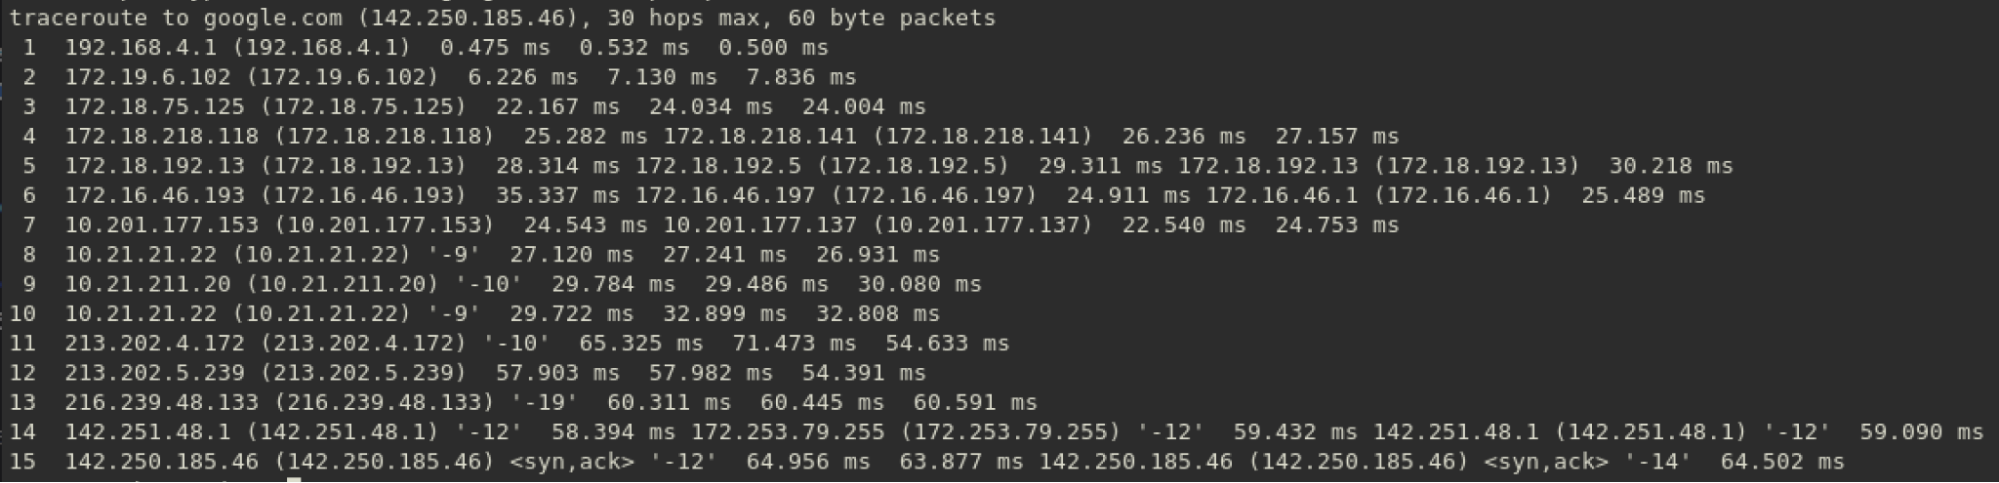 traceroute google tcp 443 with back ttl